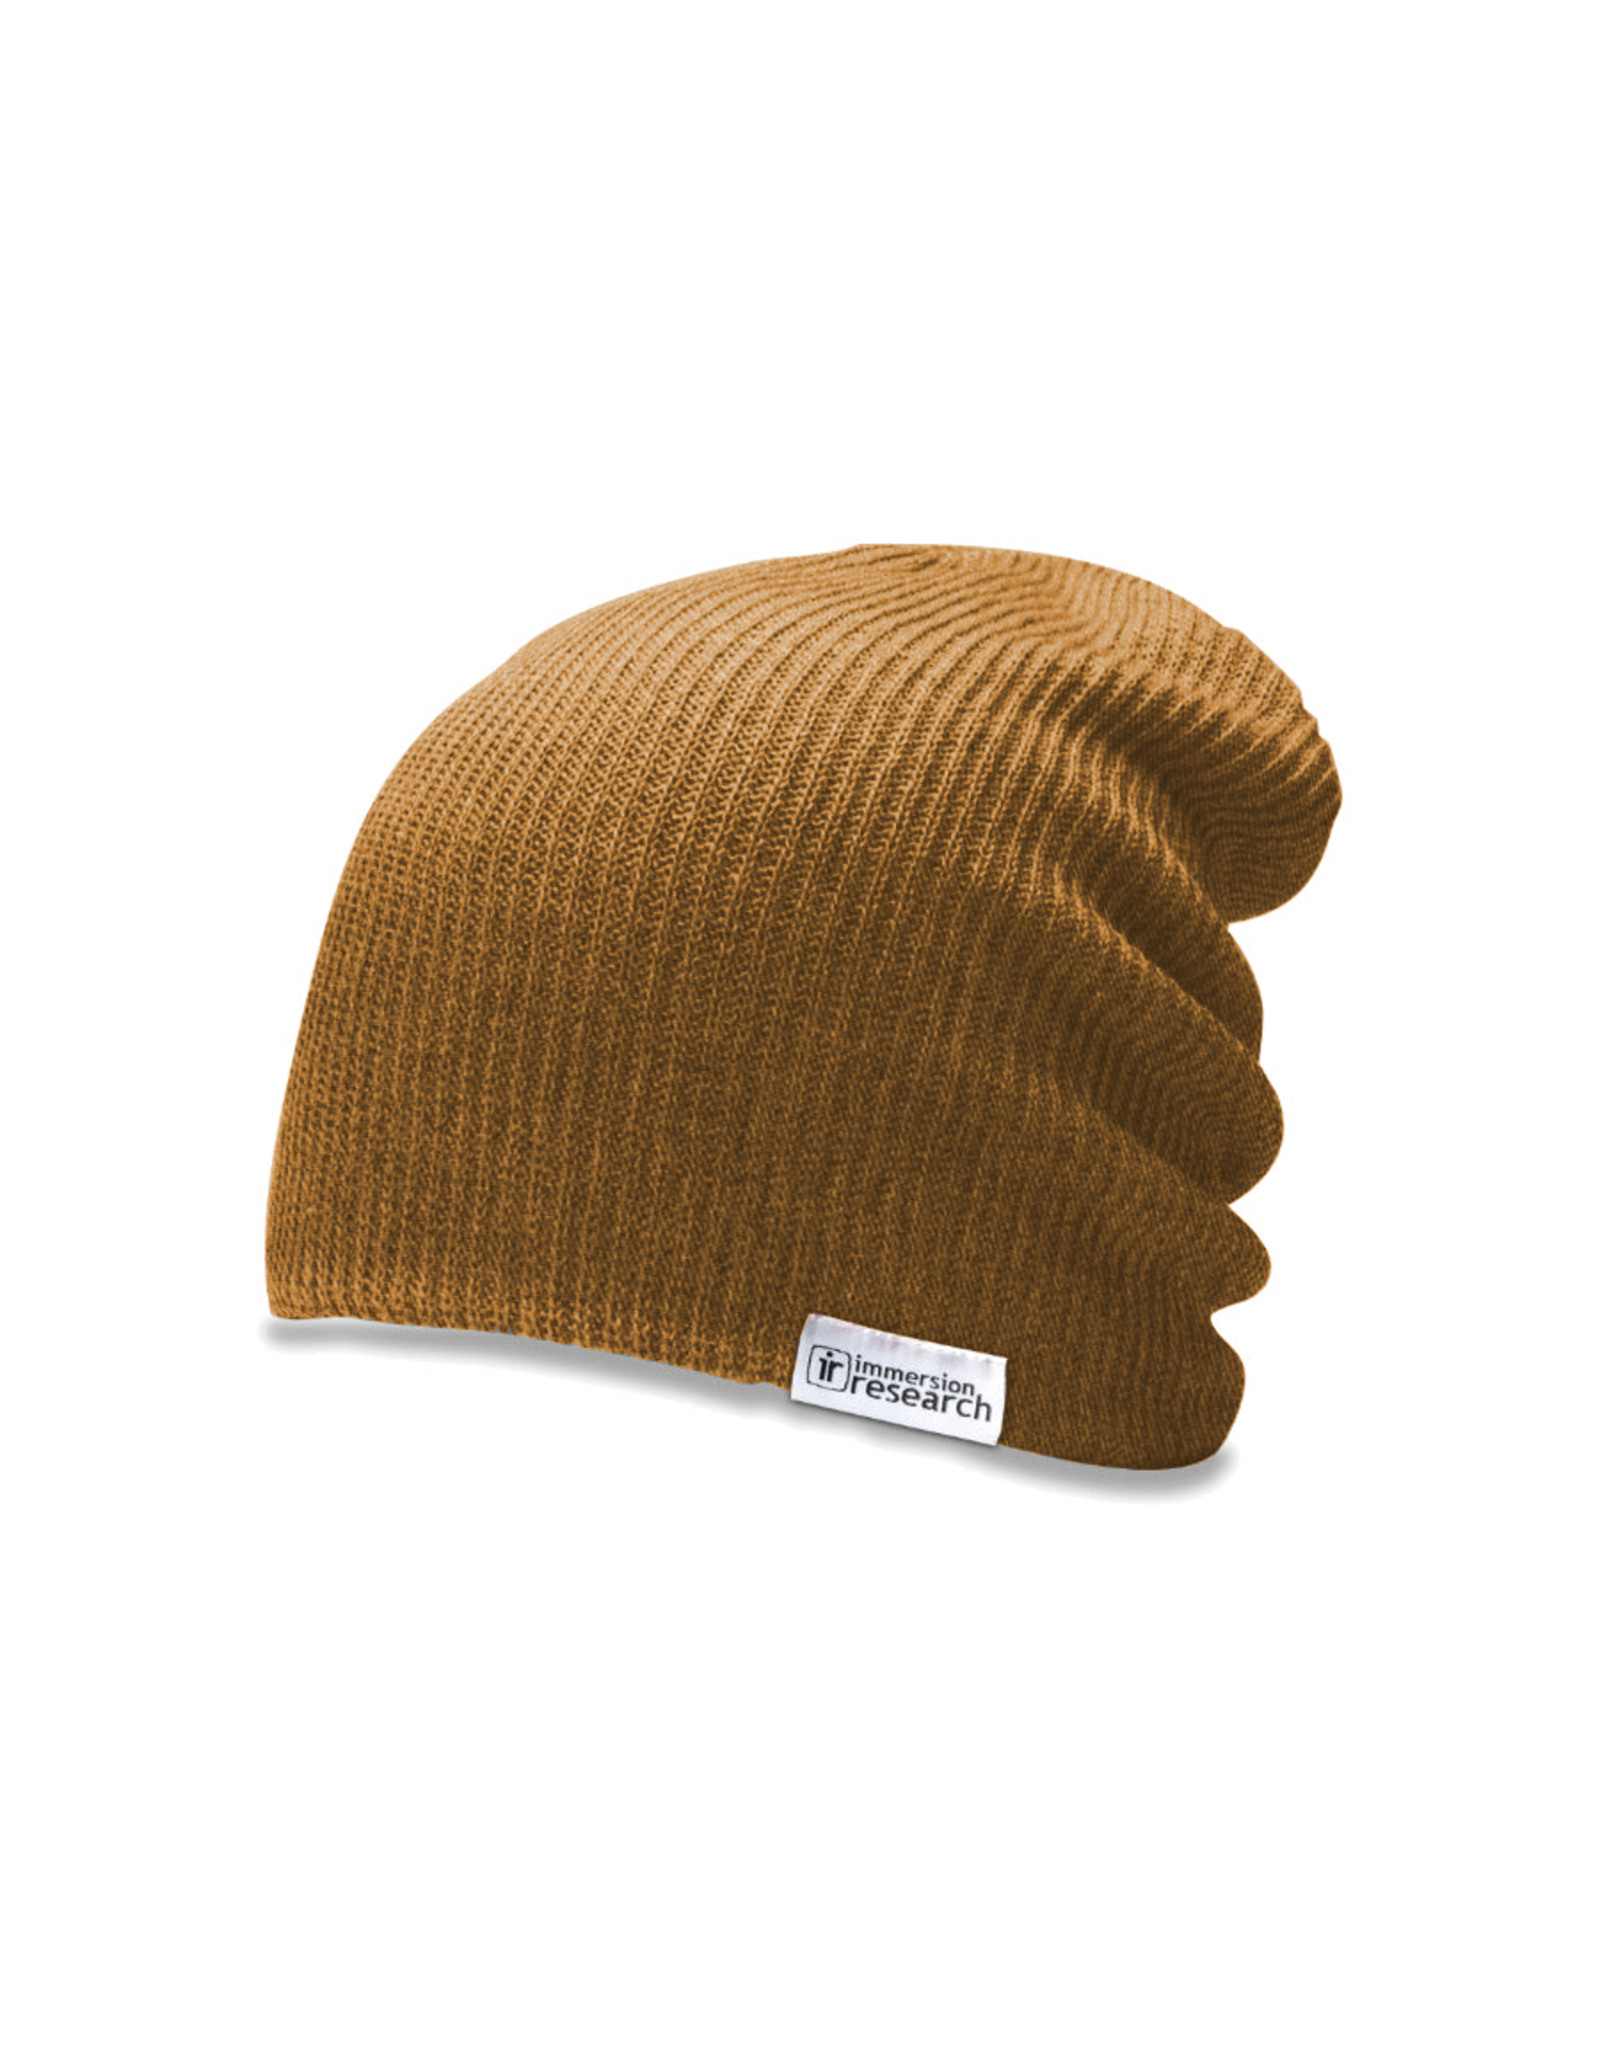 Immersion Research IR Super Slouch Beanie